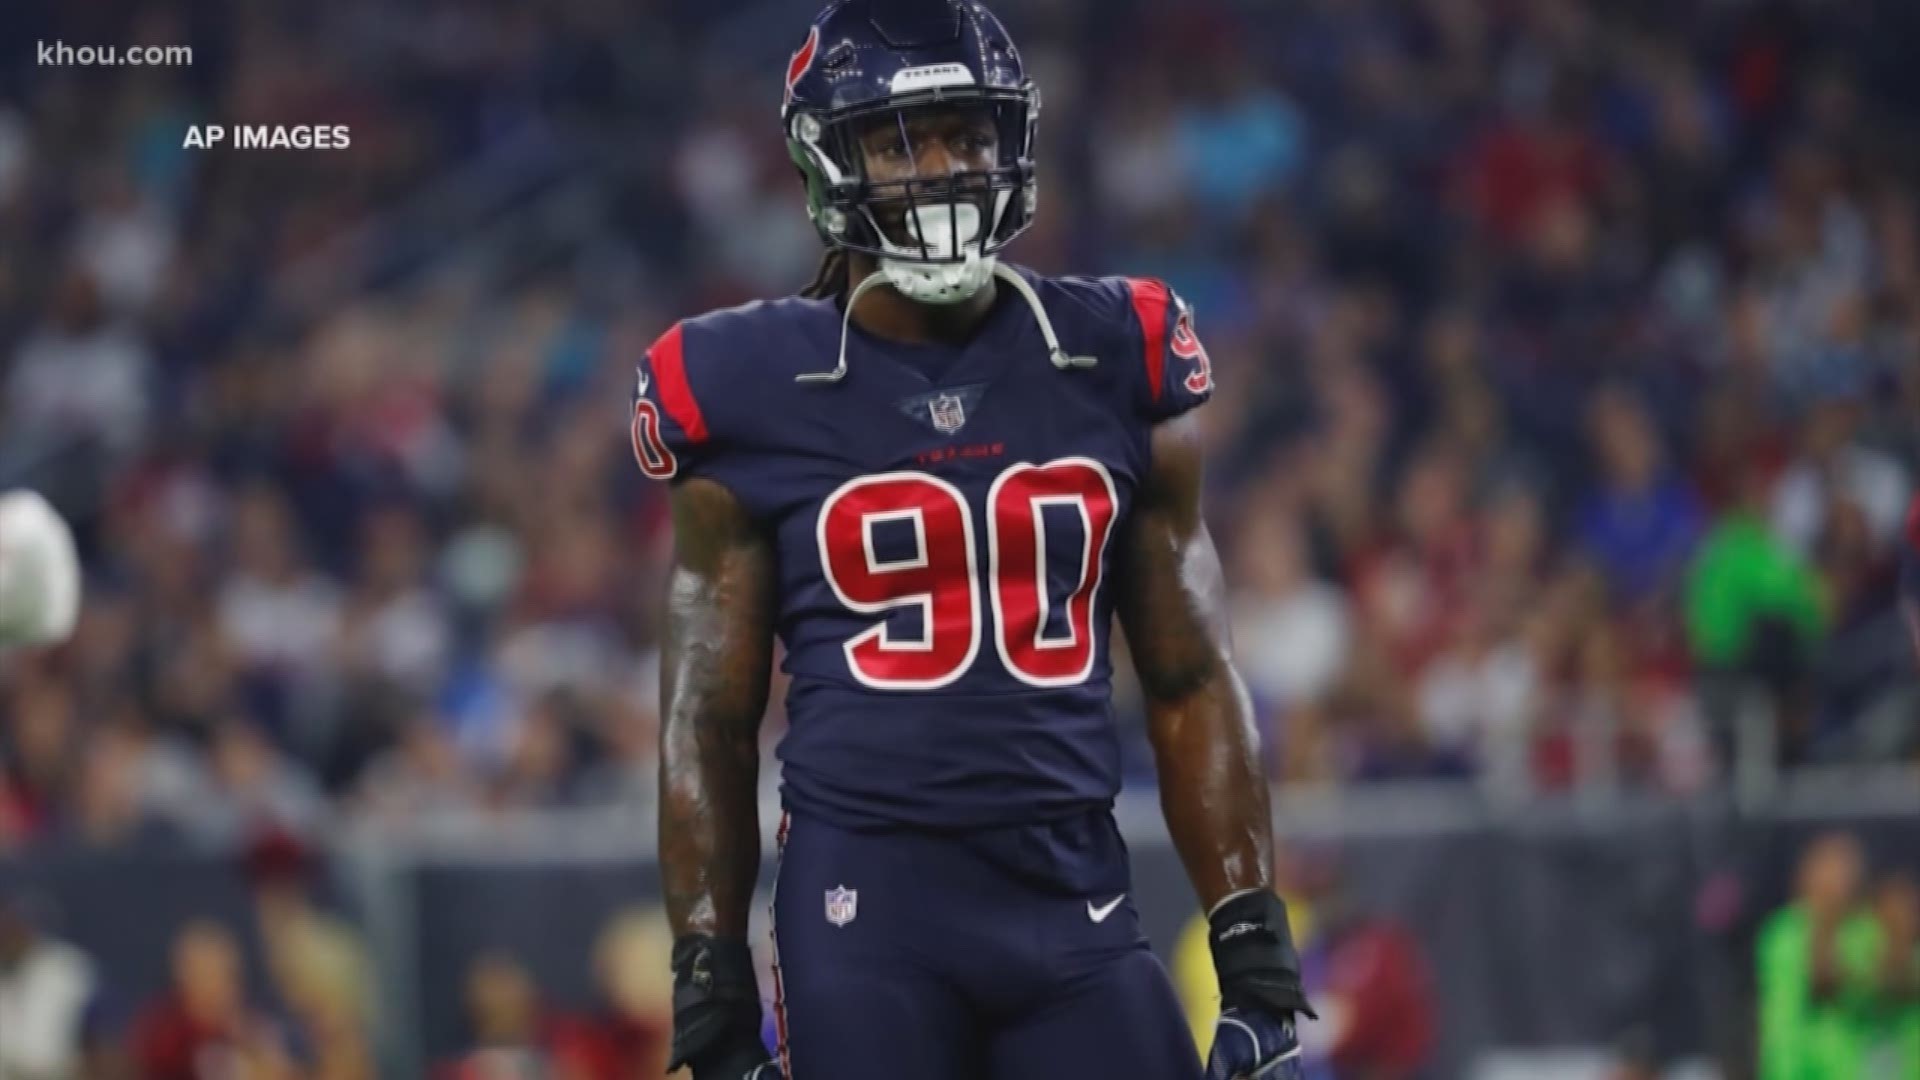 Are you ready for some football? The Texans kick off training camp today. Jason Bristol breaks down the big storylines to watch.